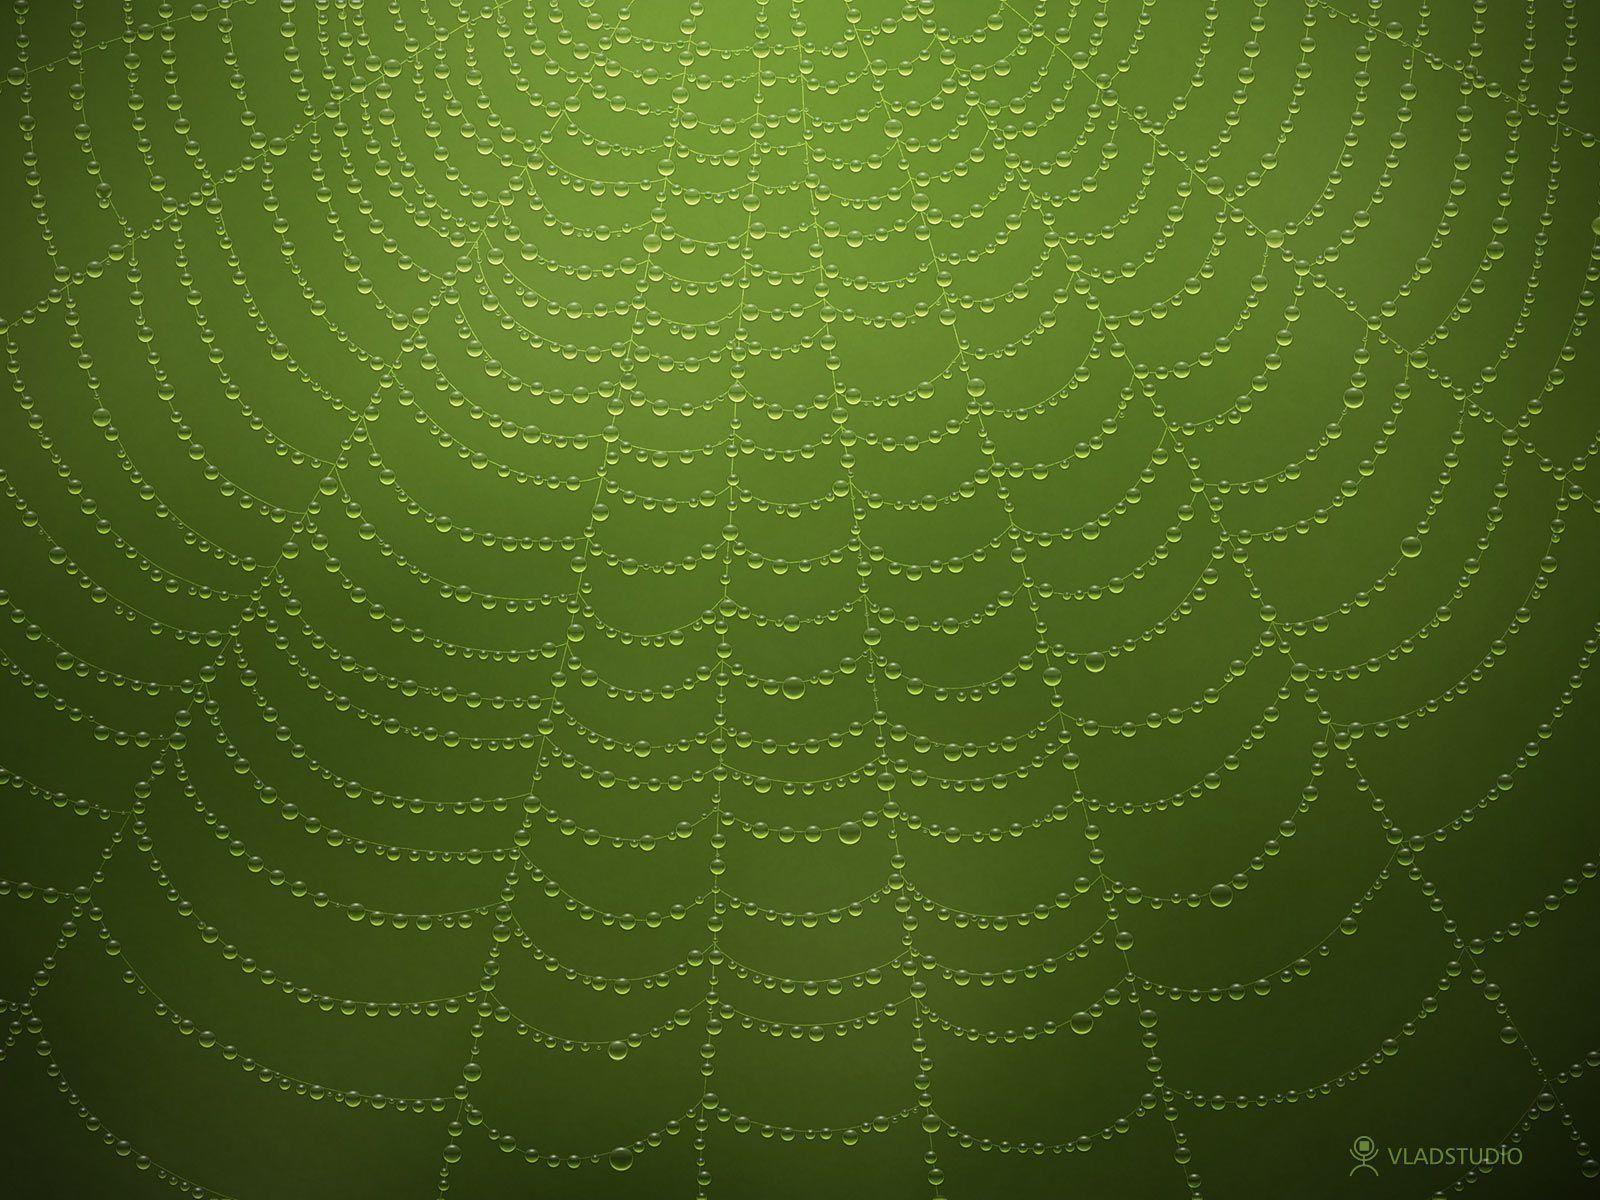 Water drops on a spider web 2